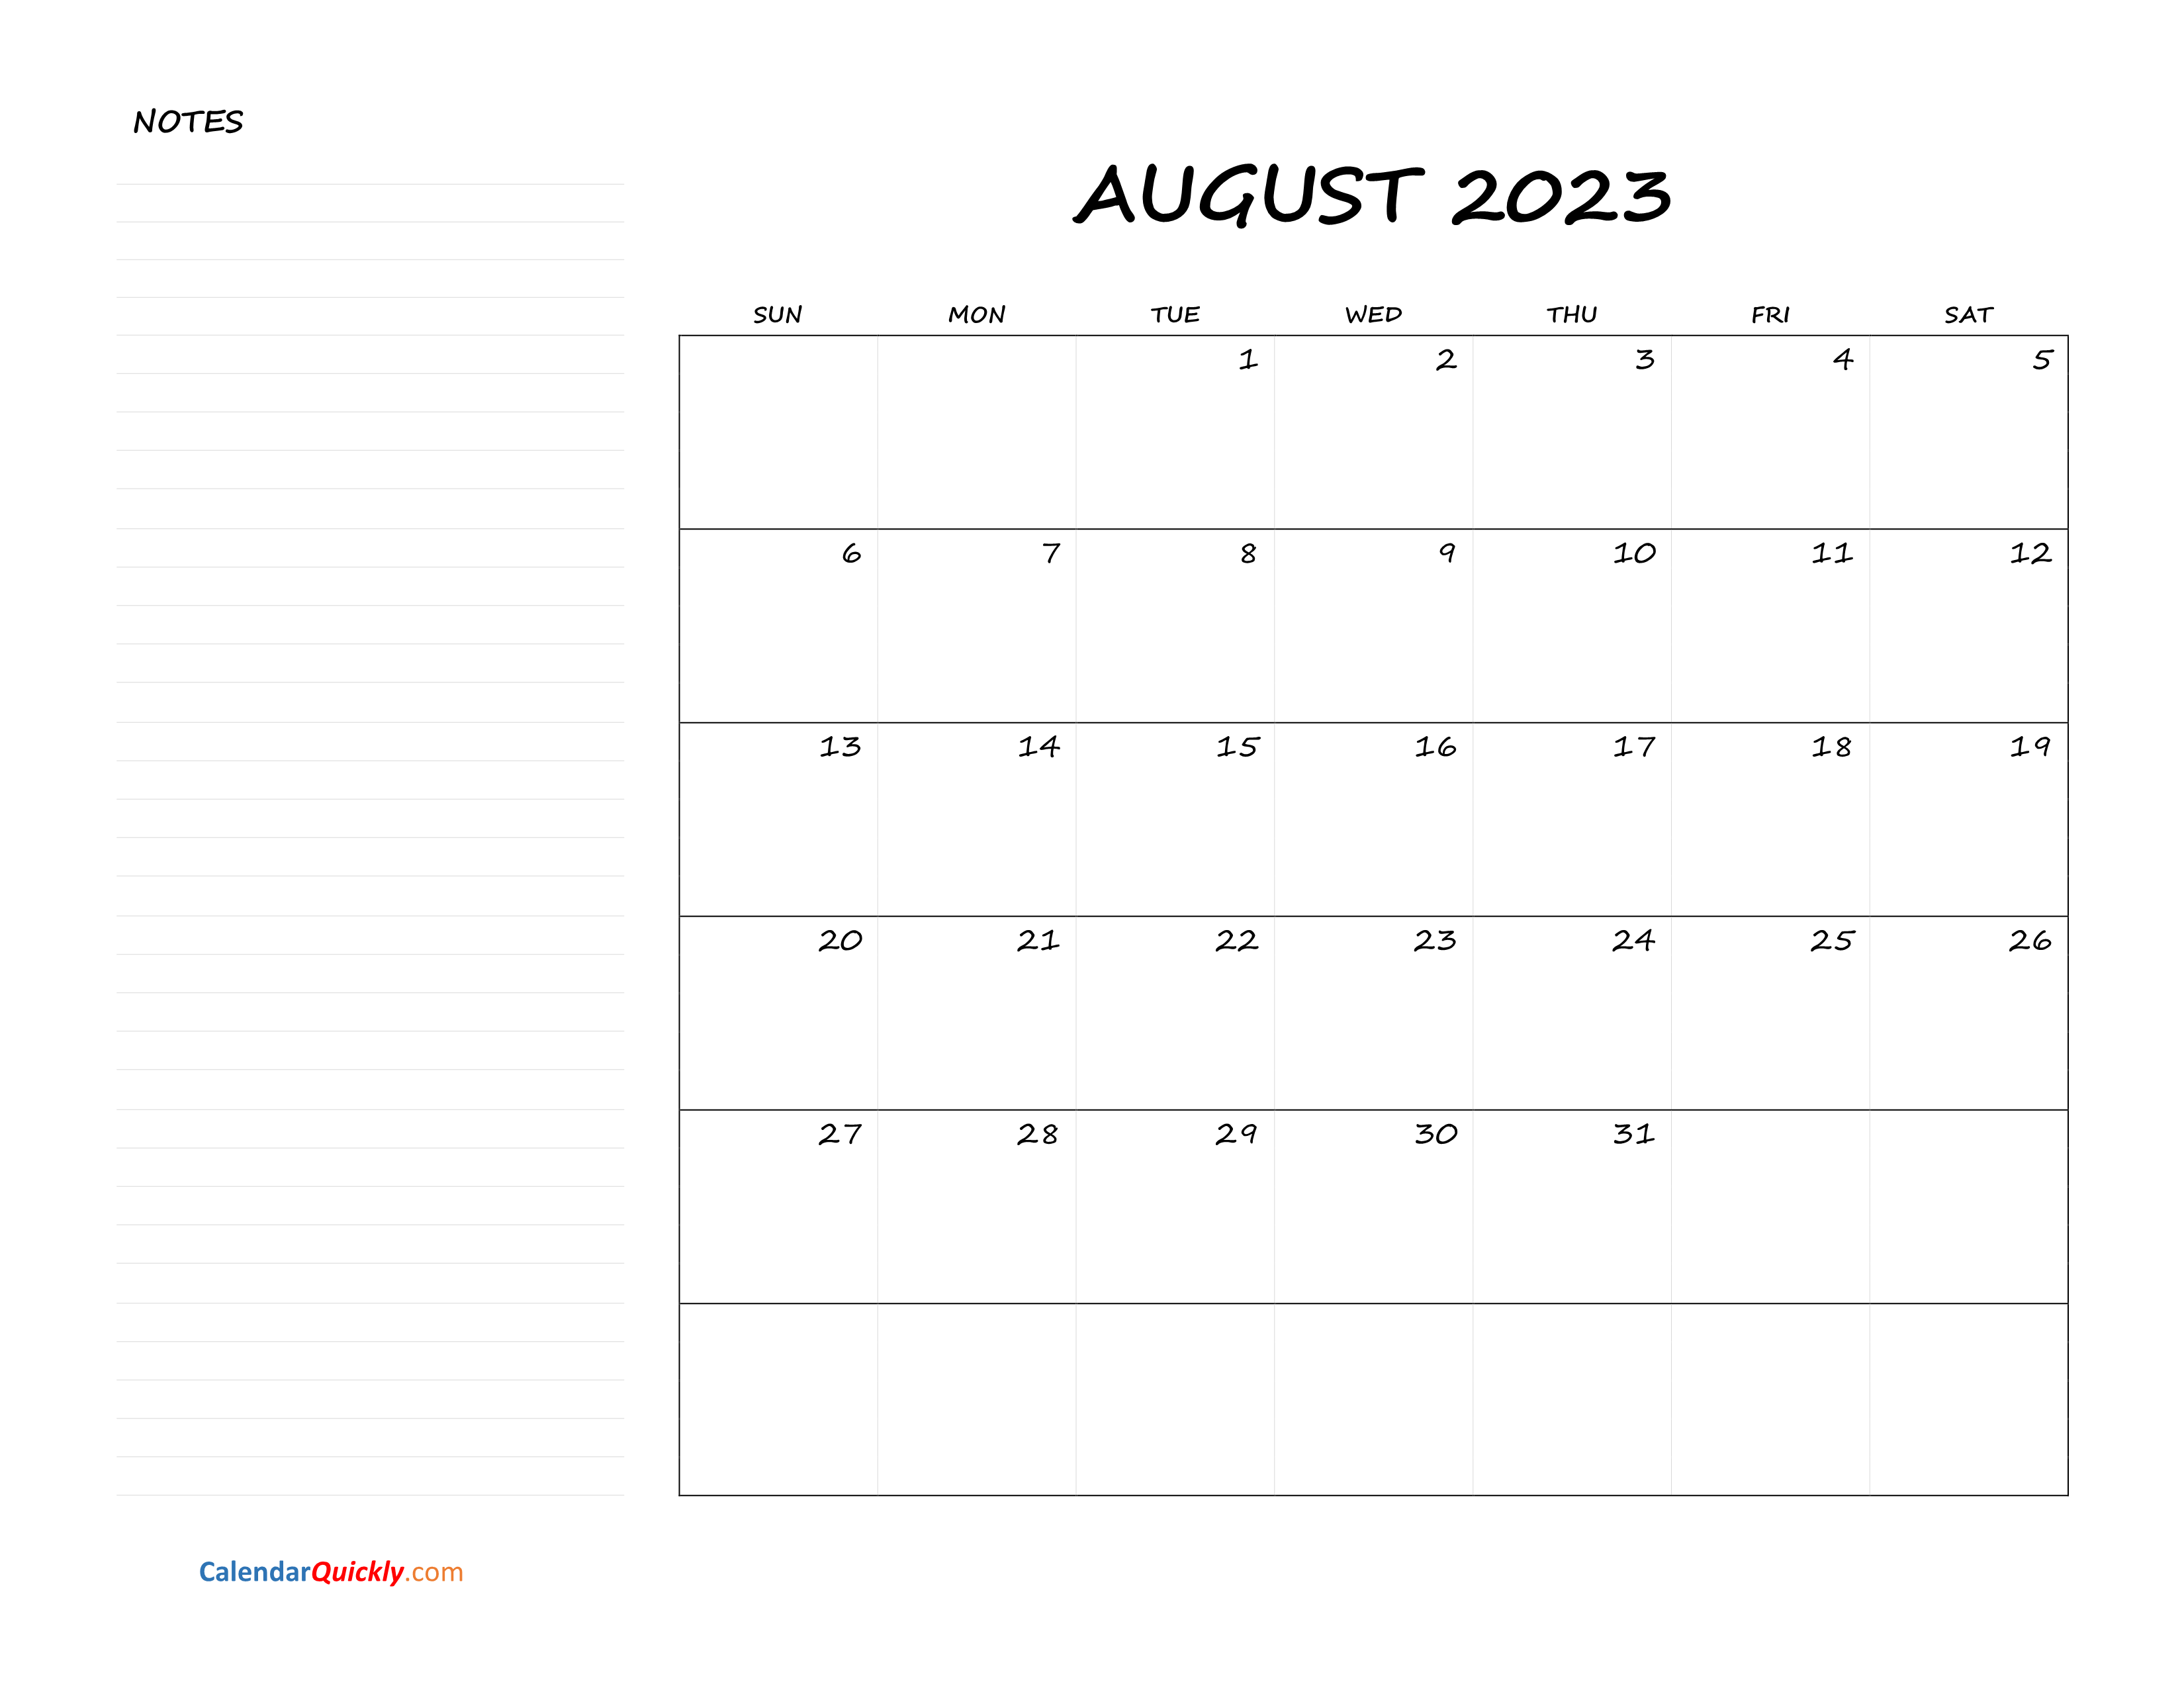 August Blank Calendar 2023 With Notes Calendar Quickly